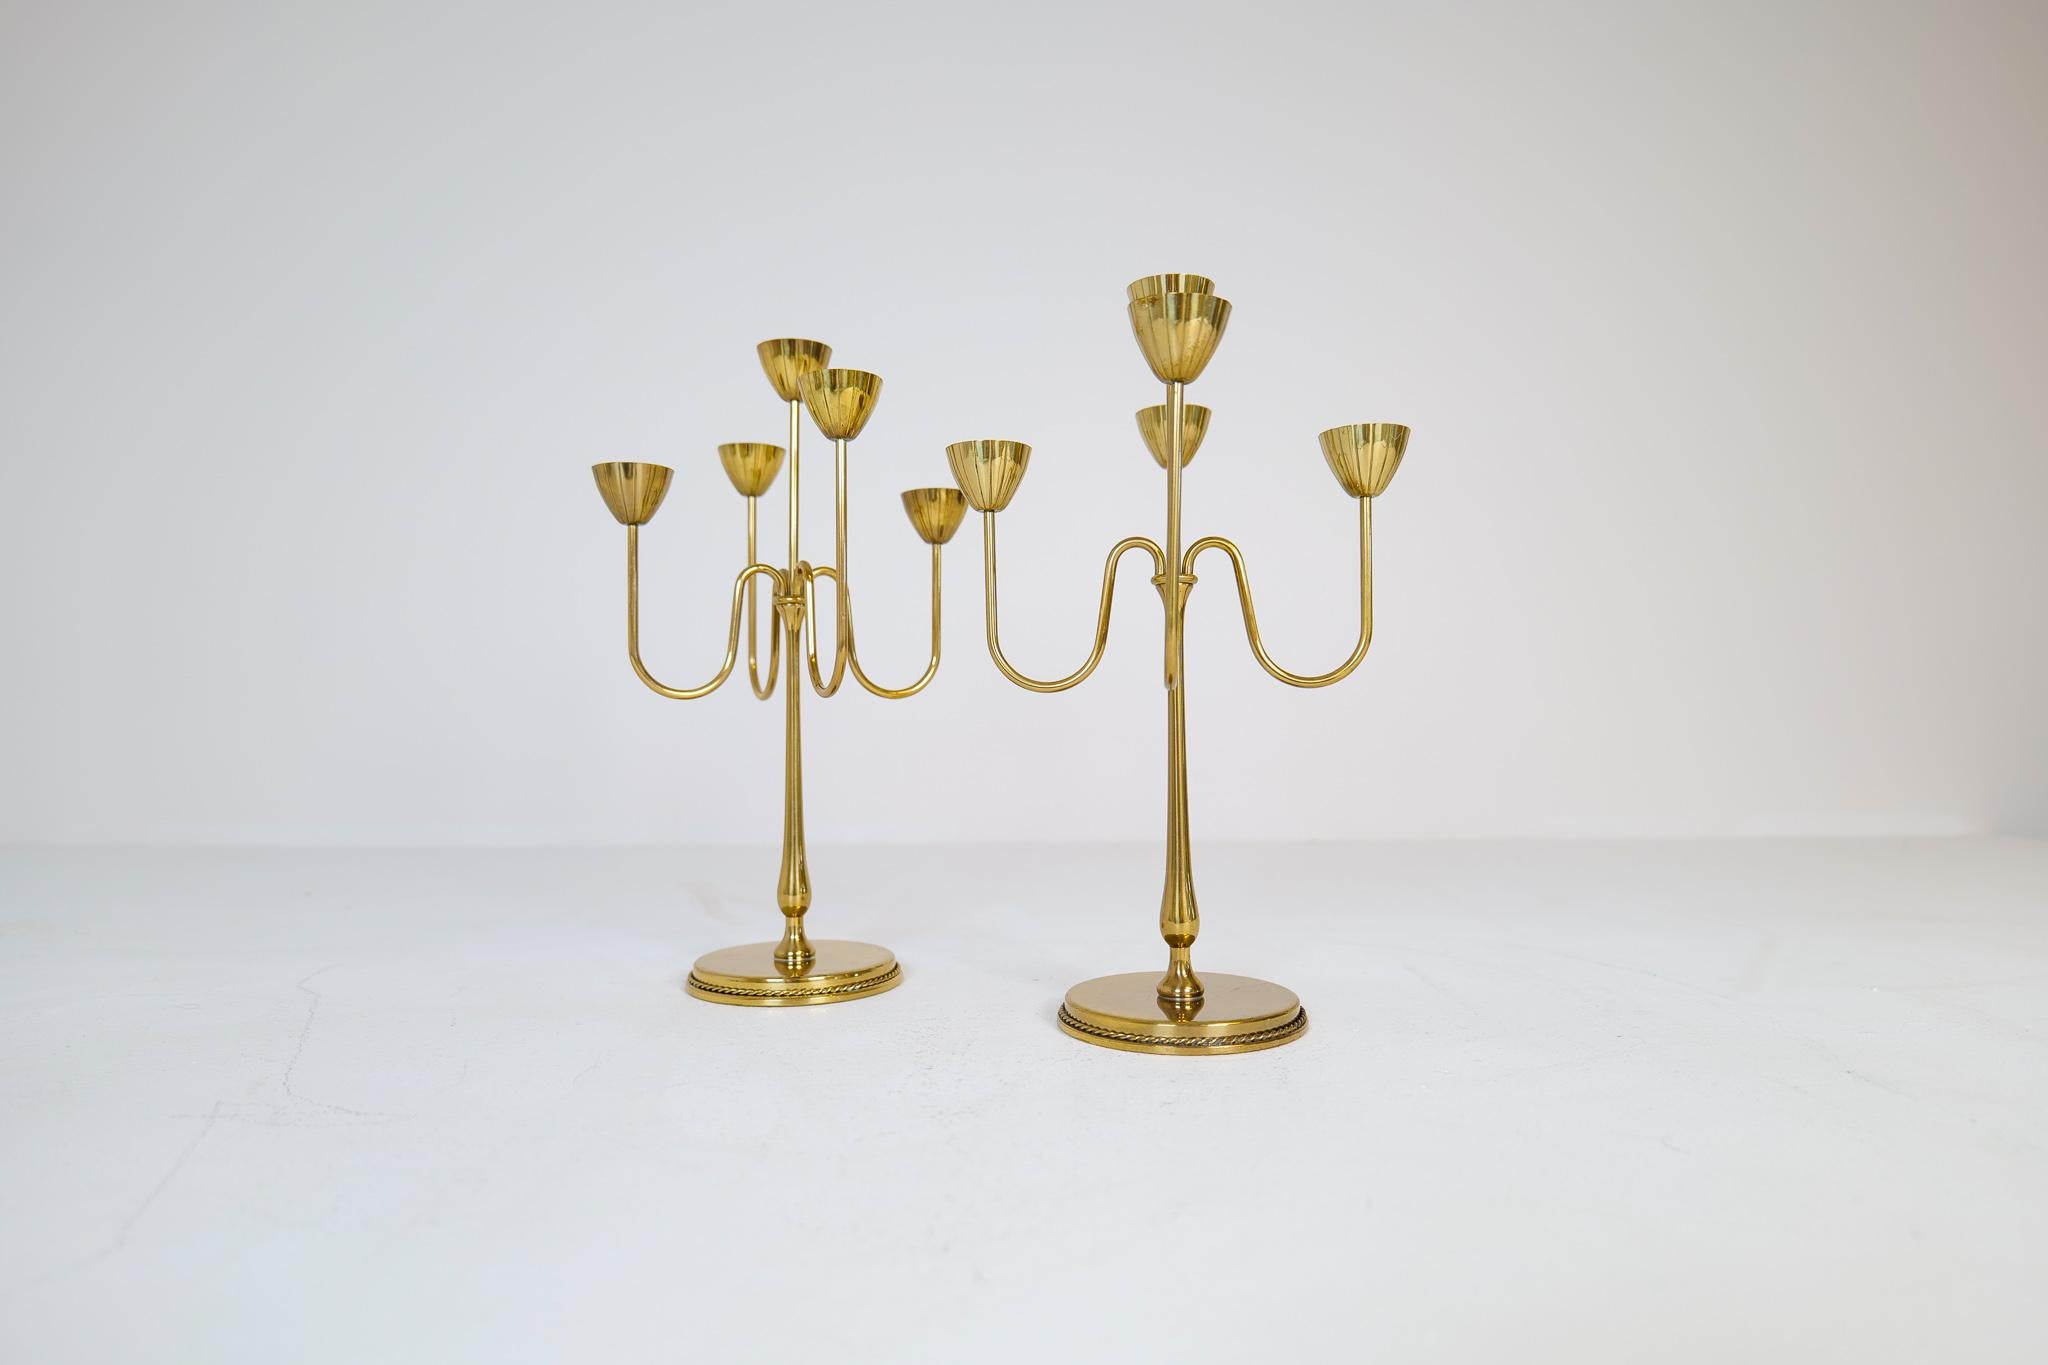 These brass candelabra was made in 1960s at Ystad Metall in Sweden. Designed by Gunnar Ander. Nice, lined brass with holders for small candlesticks.

Good condition with wear of age. 

Dimensions: height: 12.41 in. (32 cm) width: 8.08 in. (21